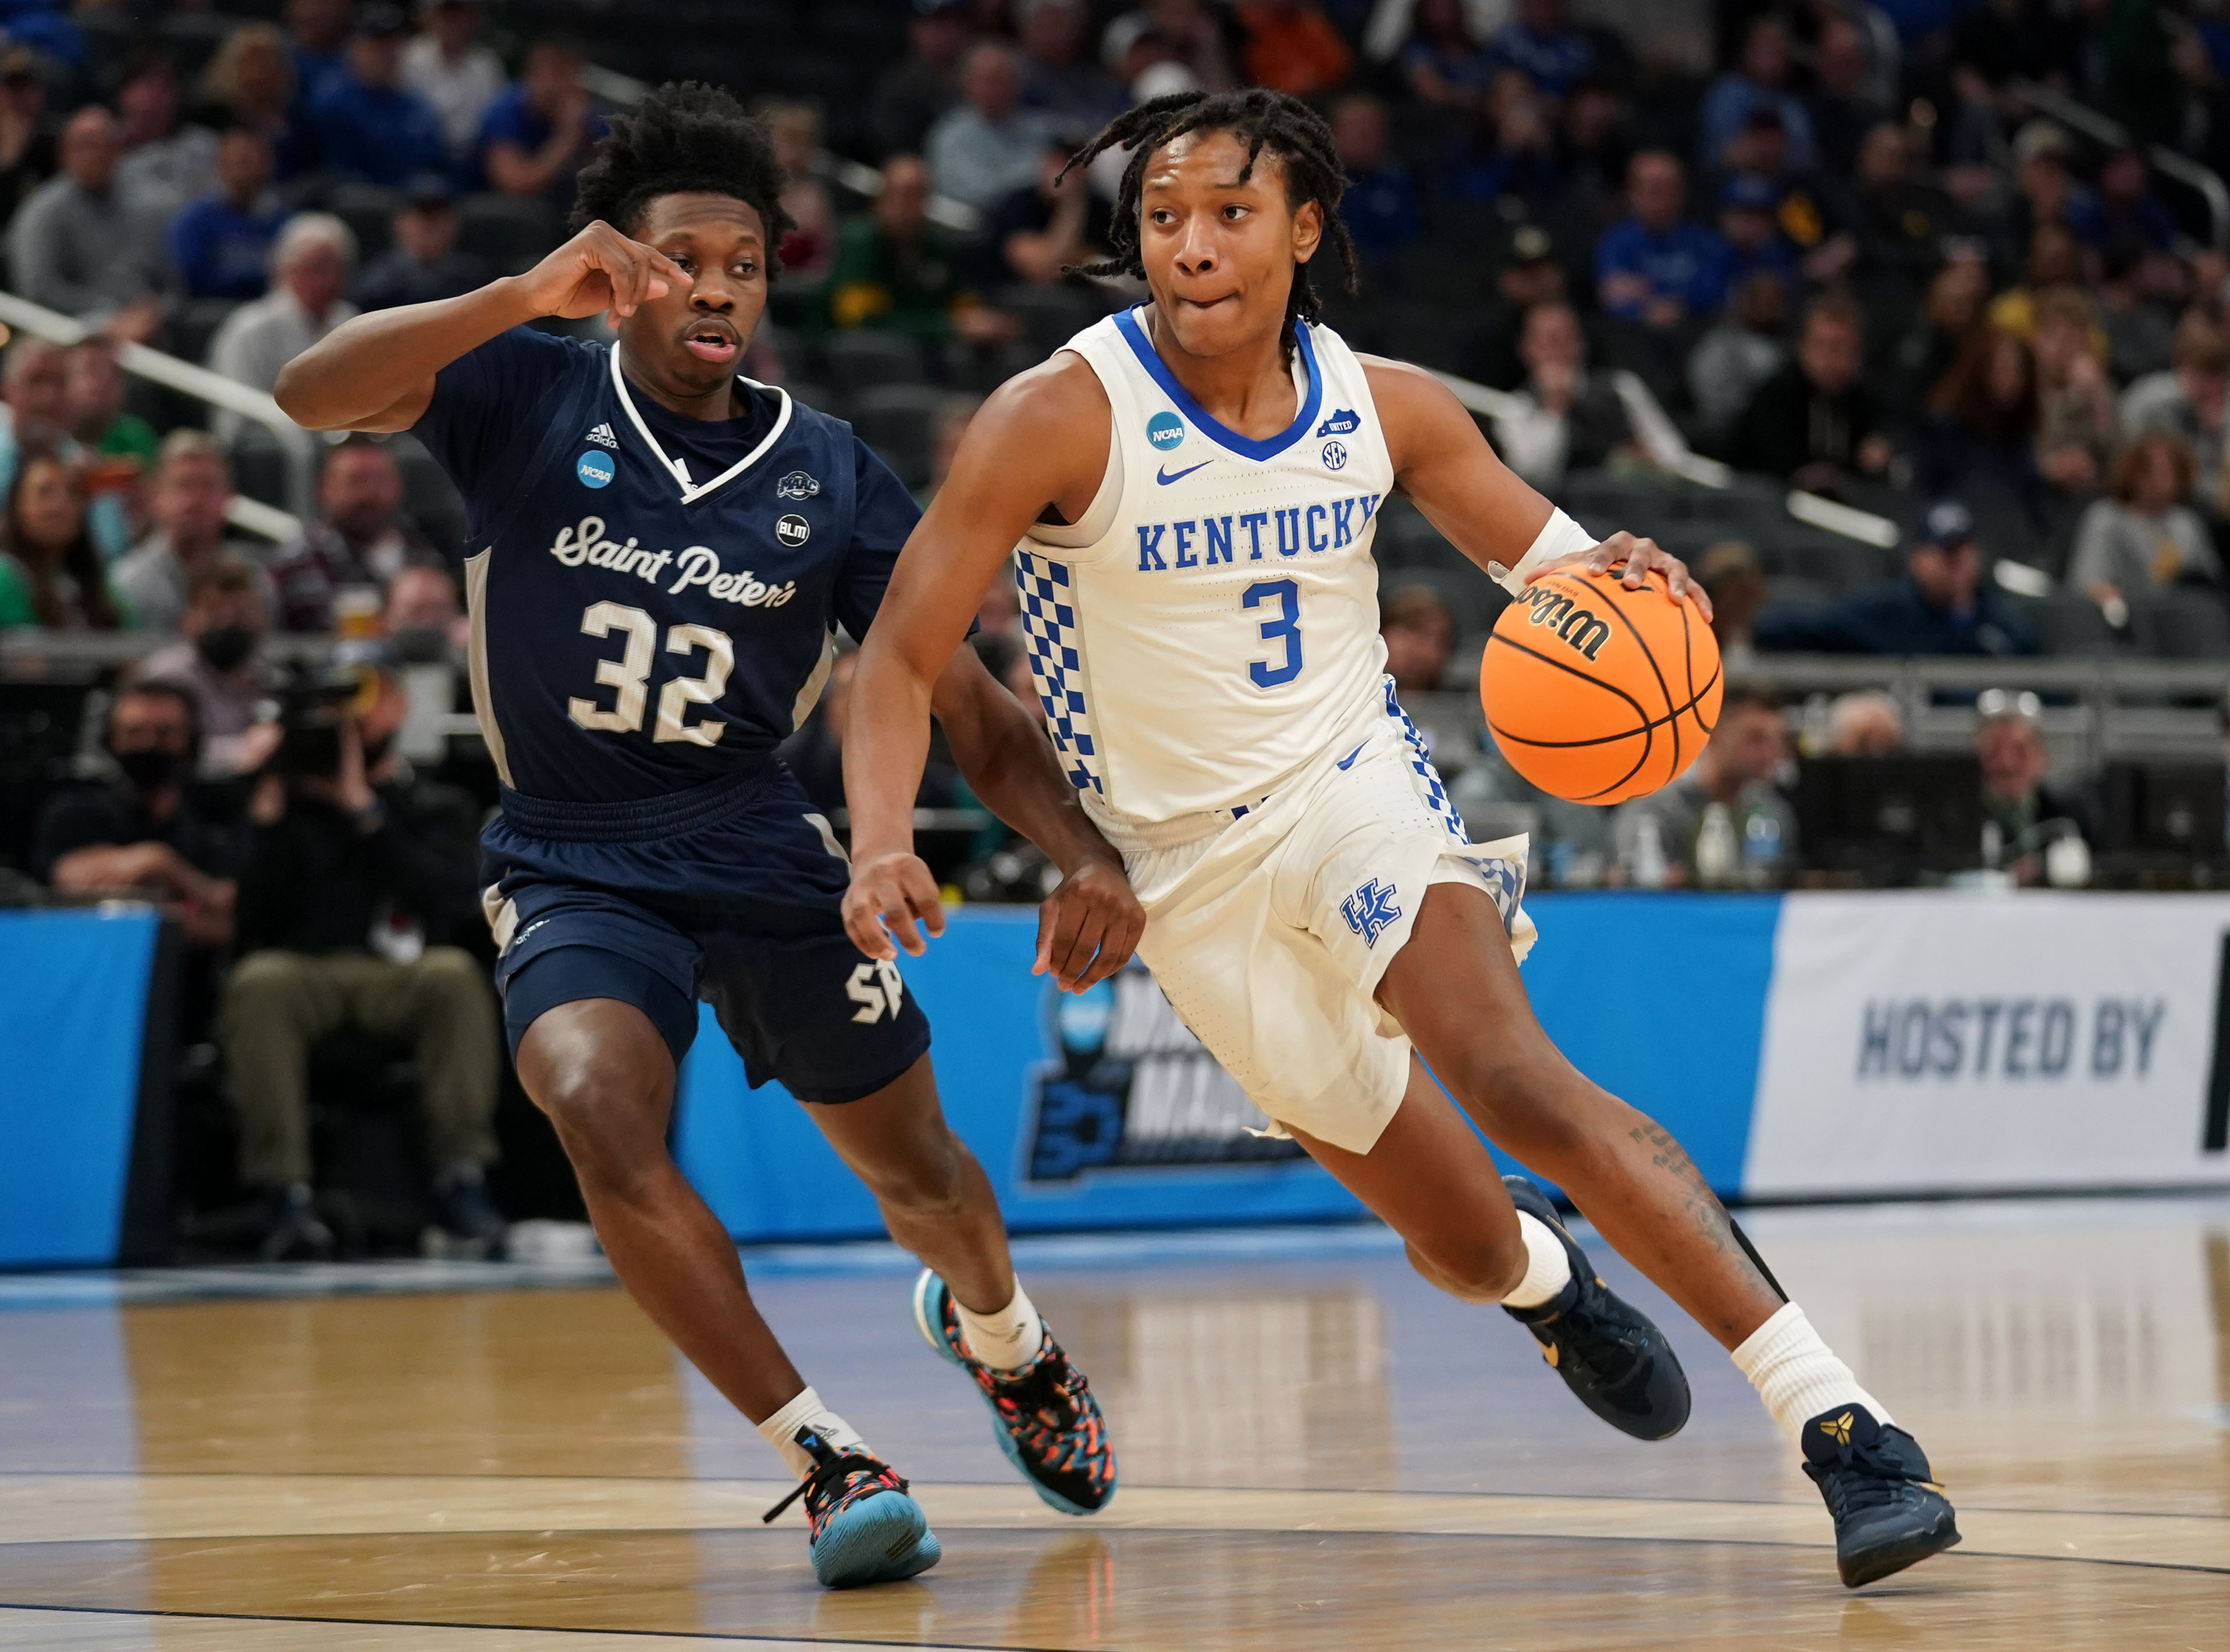 TyTy Washington Jr. selected No. 29 overall by the Memphis Grizzlies